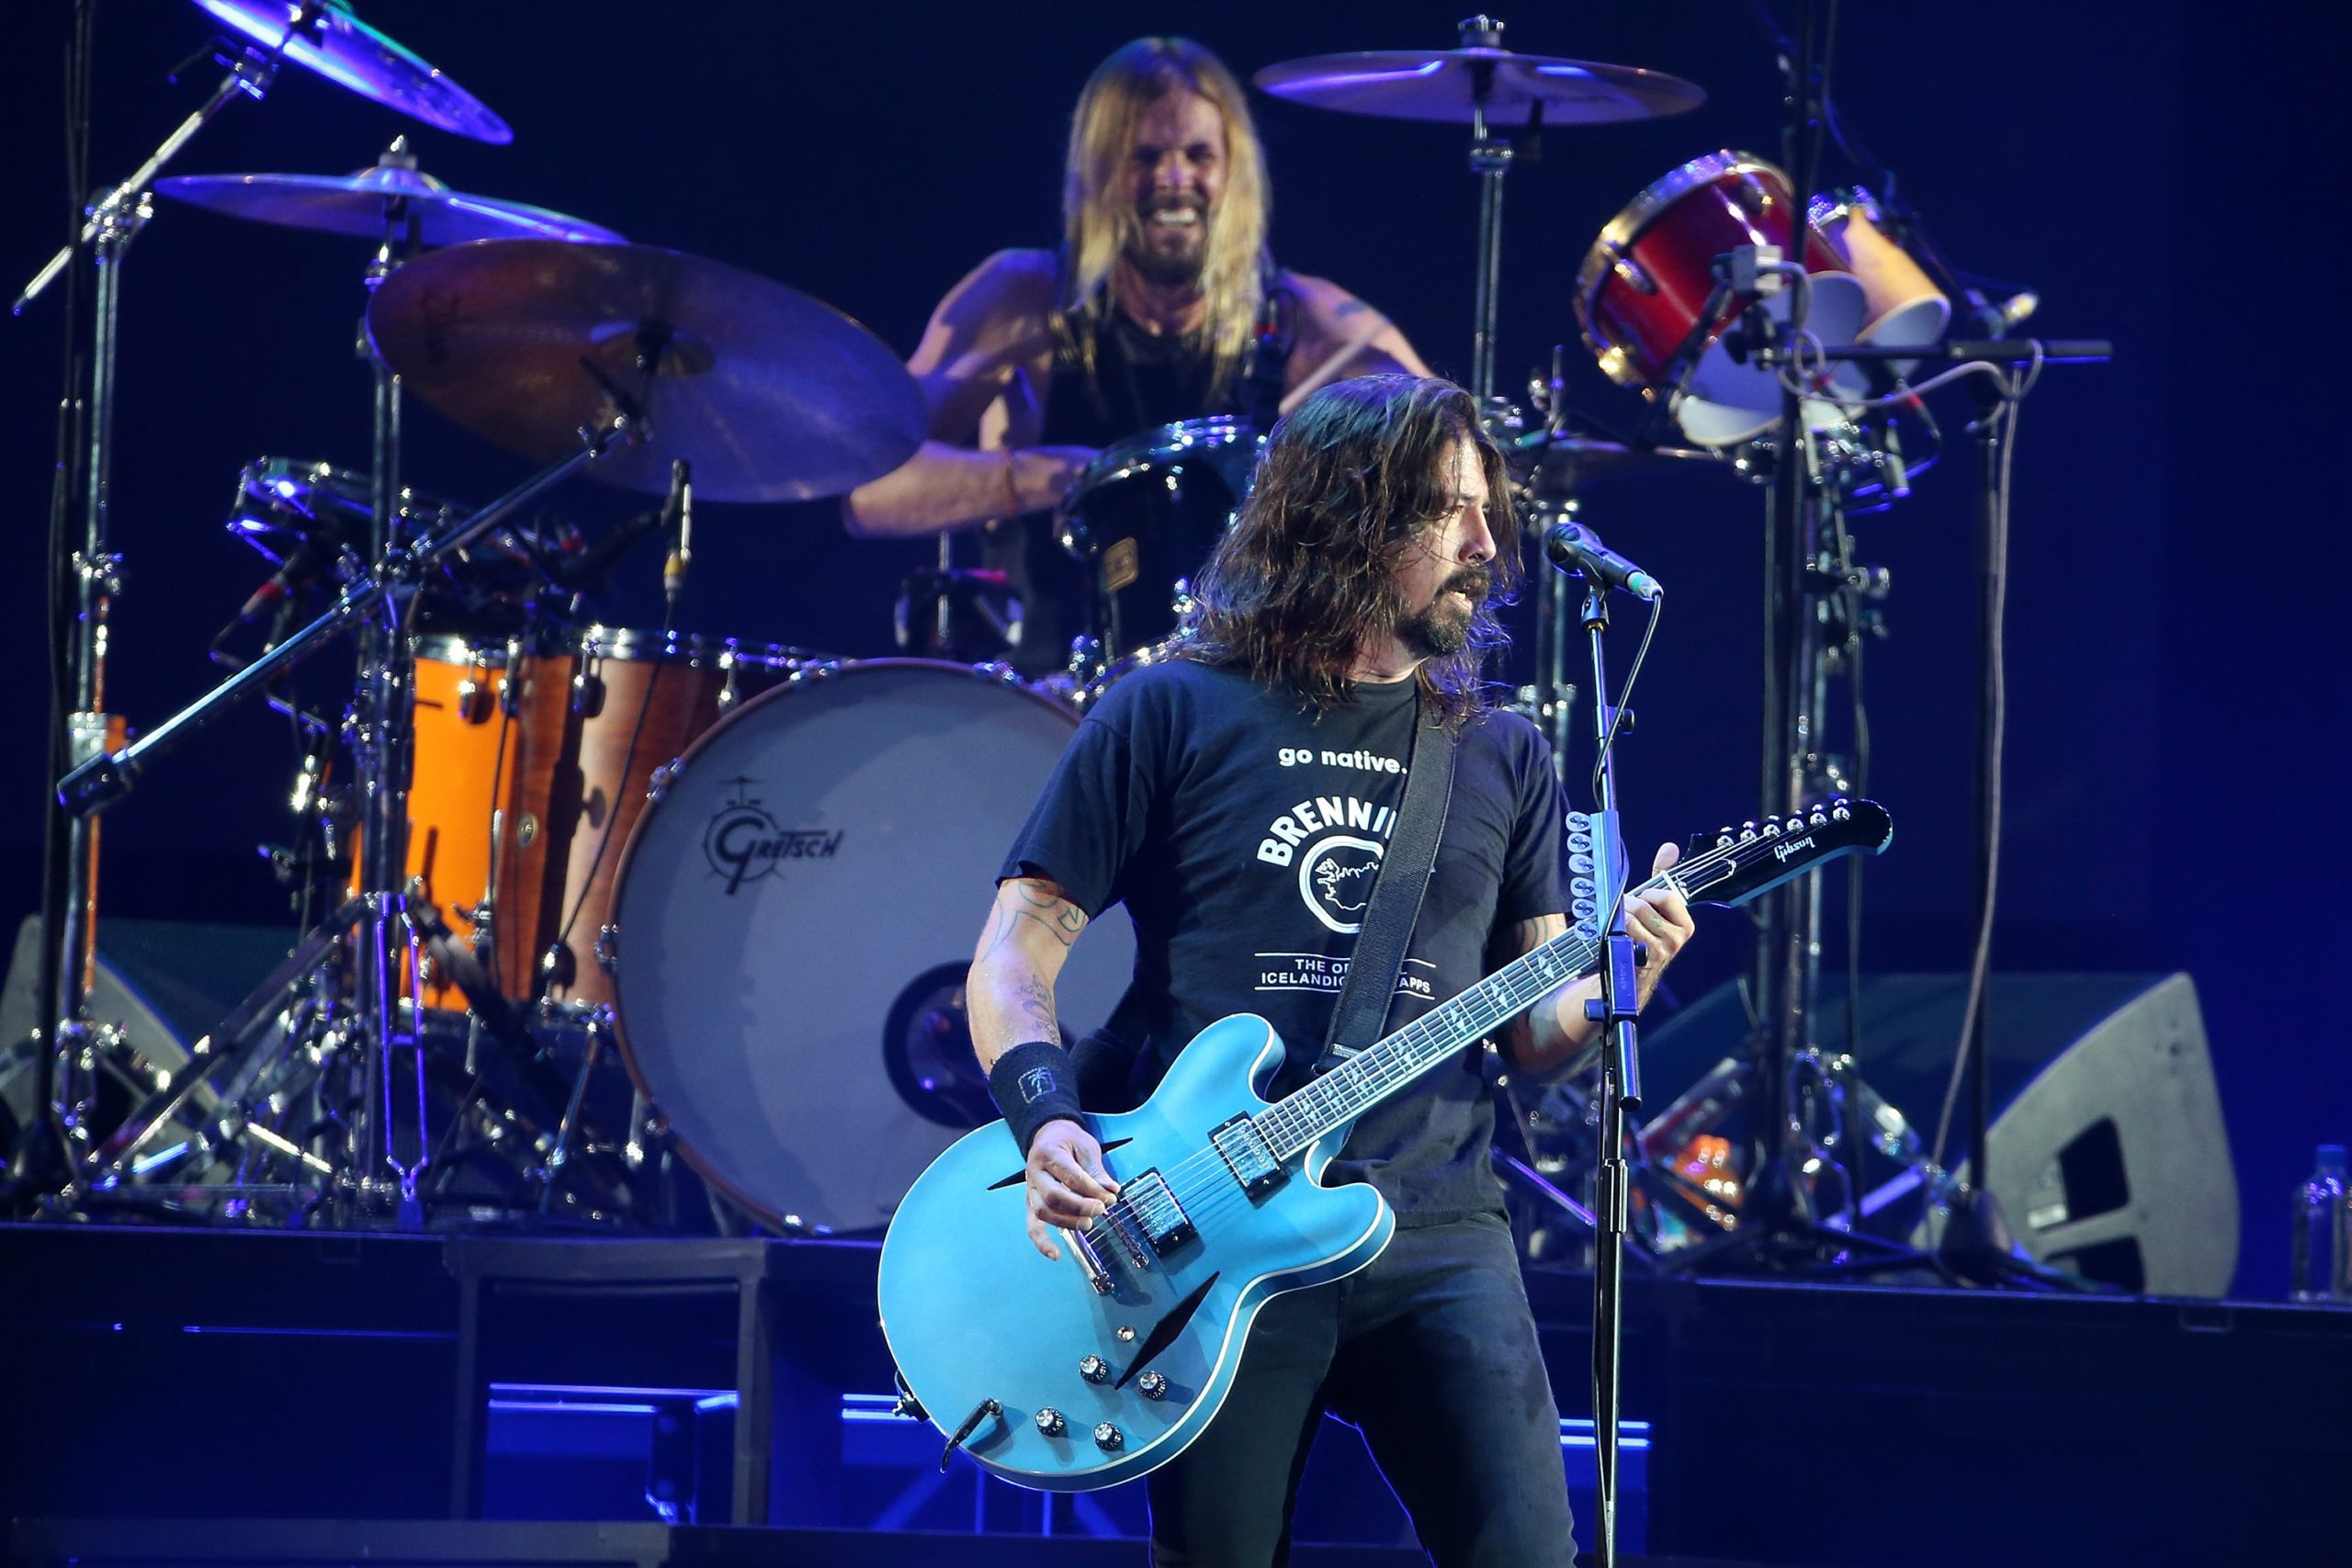 foo-fighters-to-play-livestream-concert-this-saturday-94-9-the-palm